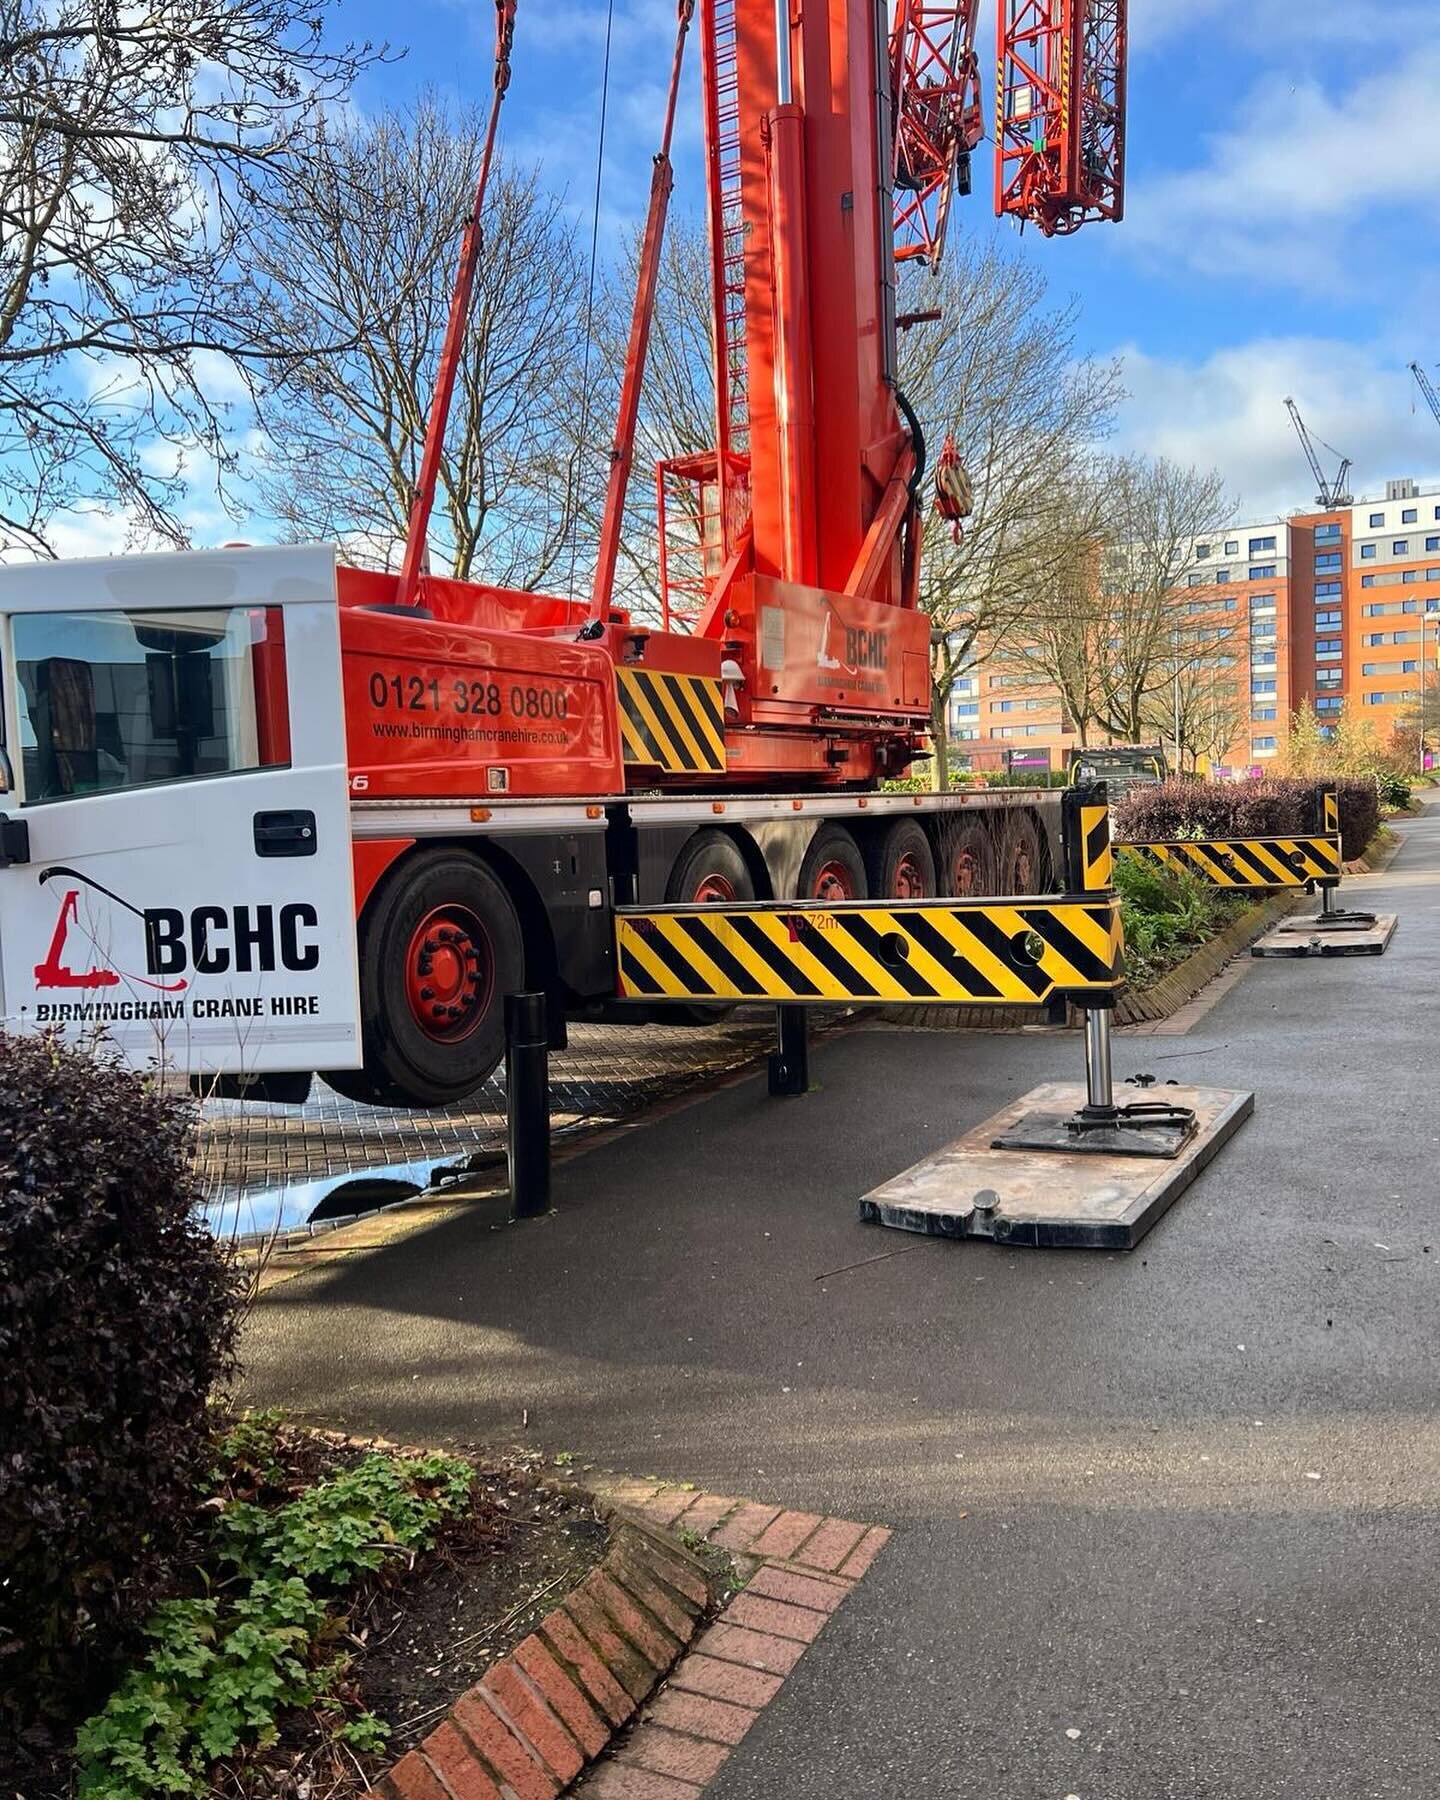 When every inch counts!
Measure twice cut once. 
A perfectly planned and well executed contract lift carried out this weekend in our home city of Birmingham. 
#bchc #contractlift #birmingham #cranehire  #birminghamcranhire #sk1265 #spierings